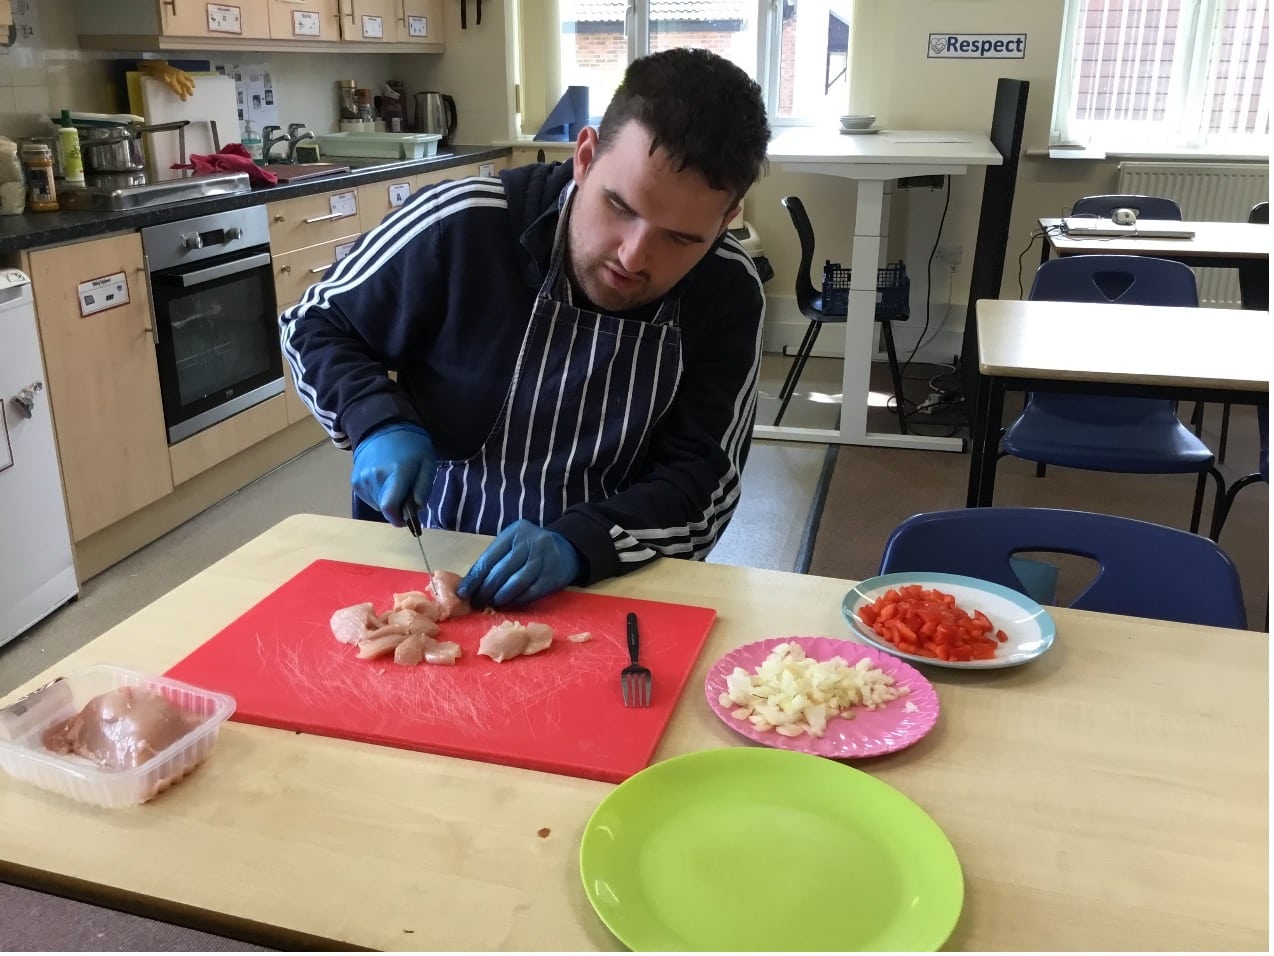 Chris making lunch for himself and the staff at college showing his Employability